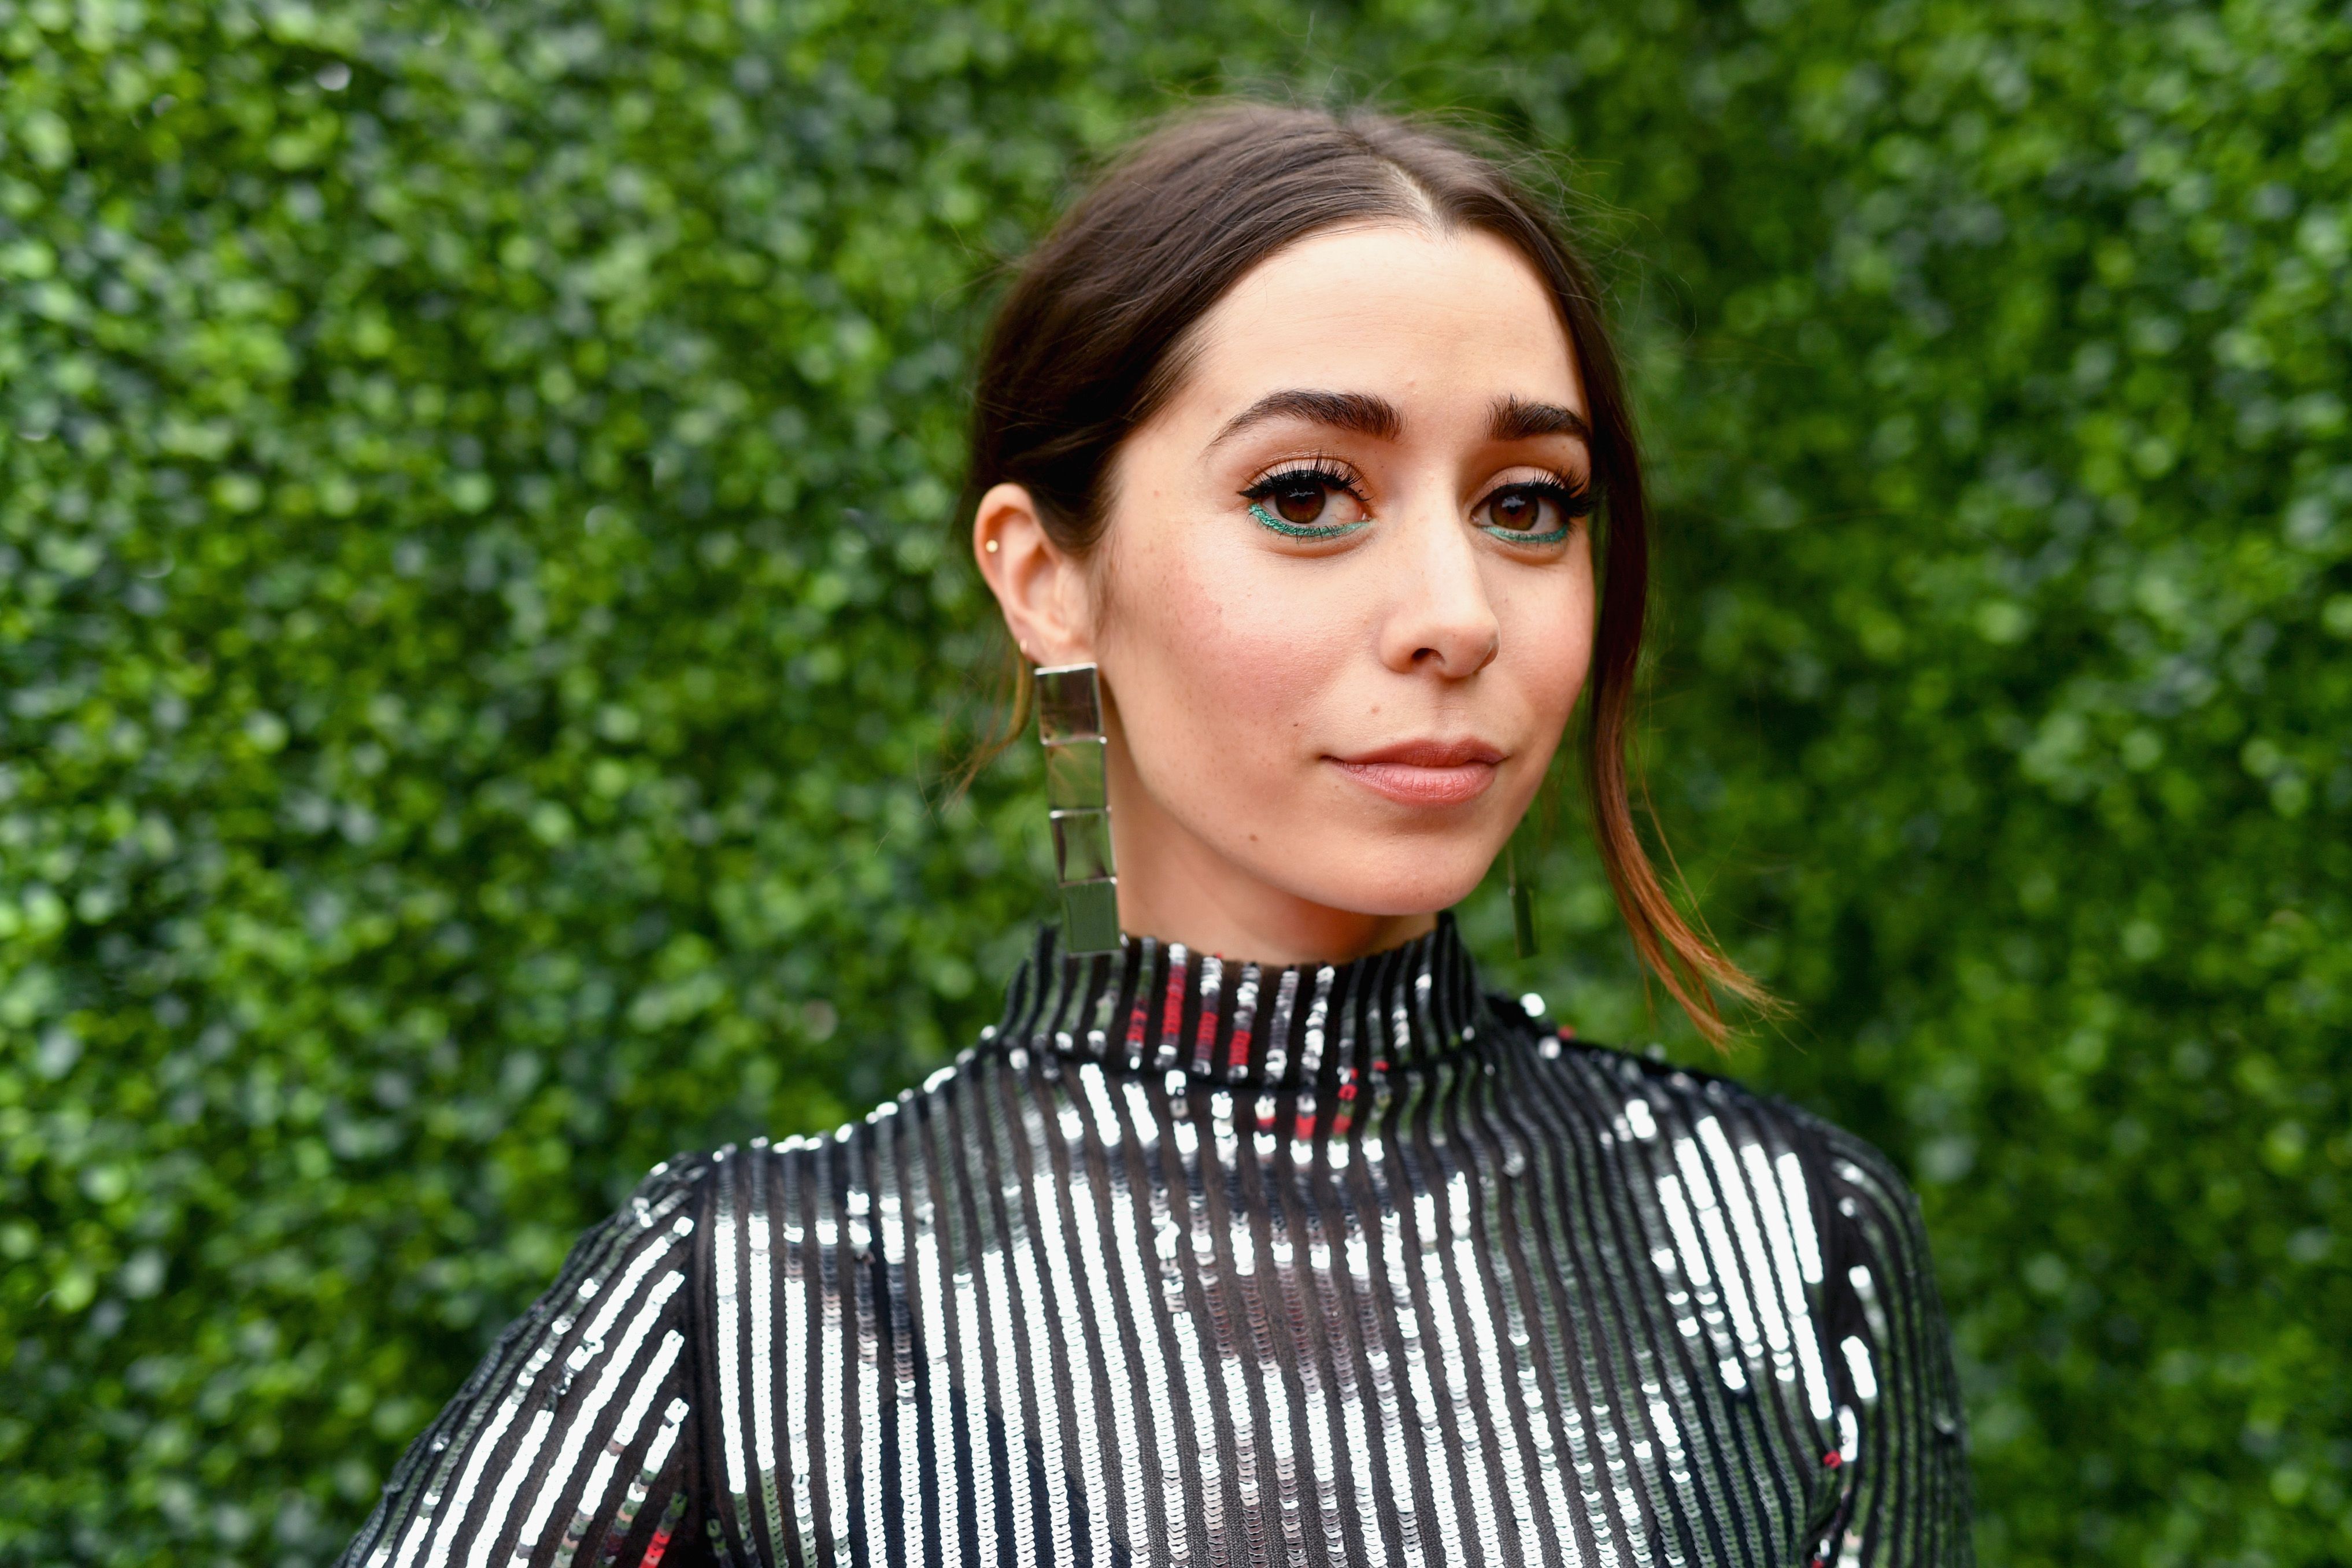 Cristin Milioti during the 2018 MTV Movie And TV Awards at Barker Hangar on June 16, 2018 in Santa Monica, California. | Source: Getty Images